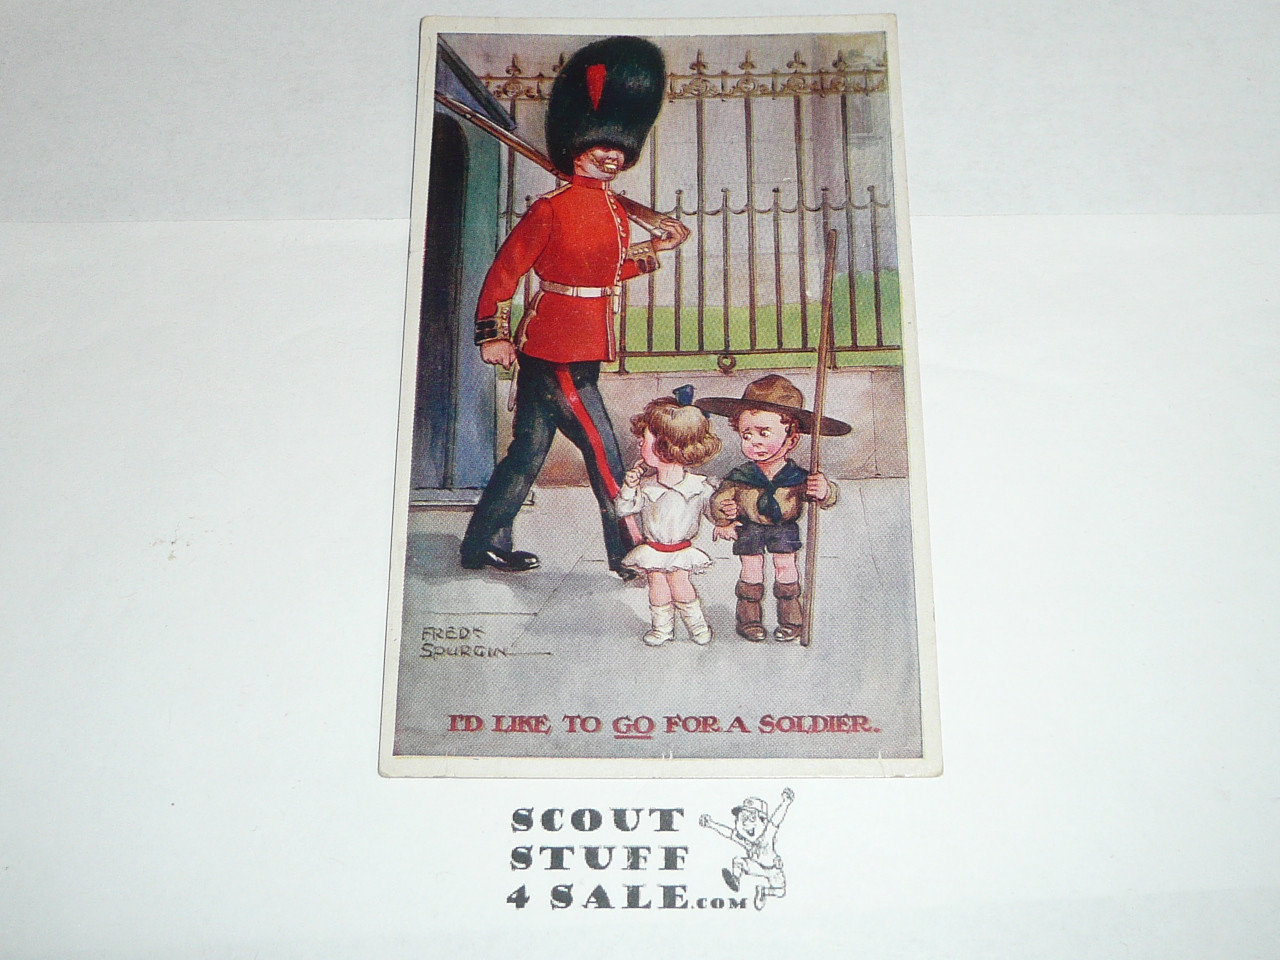 Teen's British Boy Scout Postcard, I'd Like to Go for a Soldier